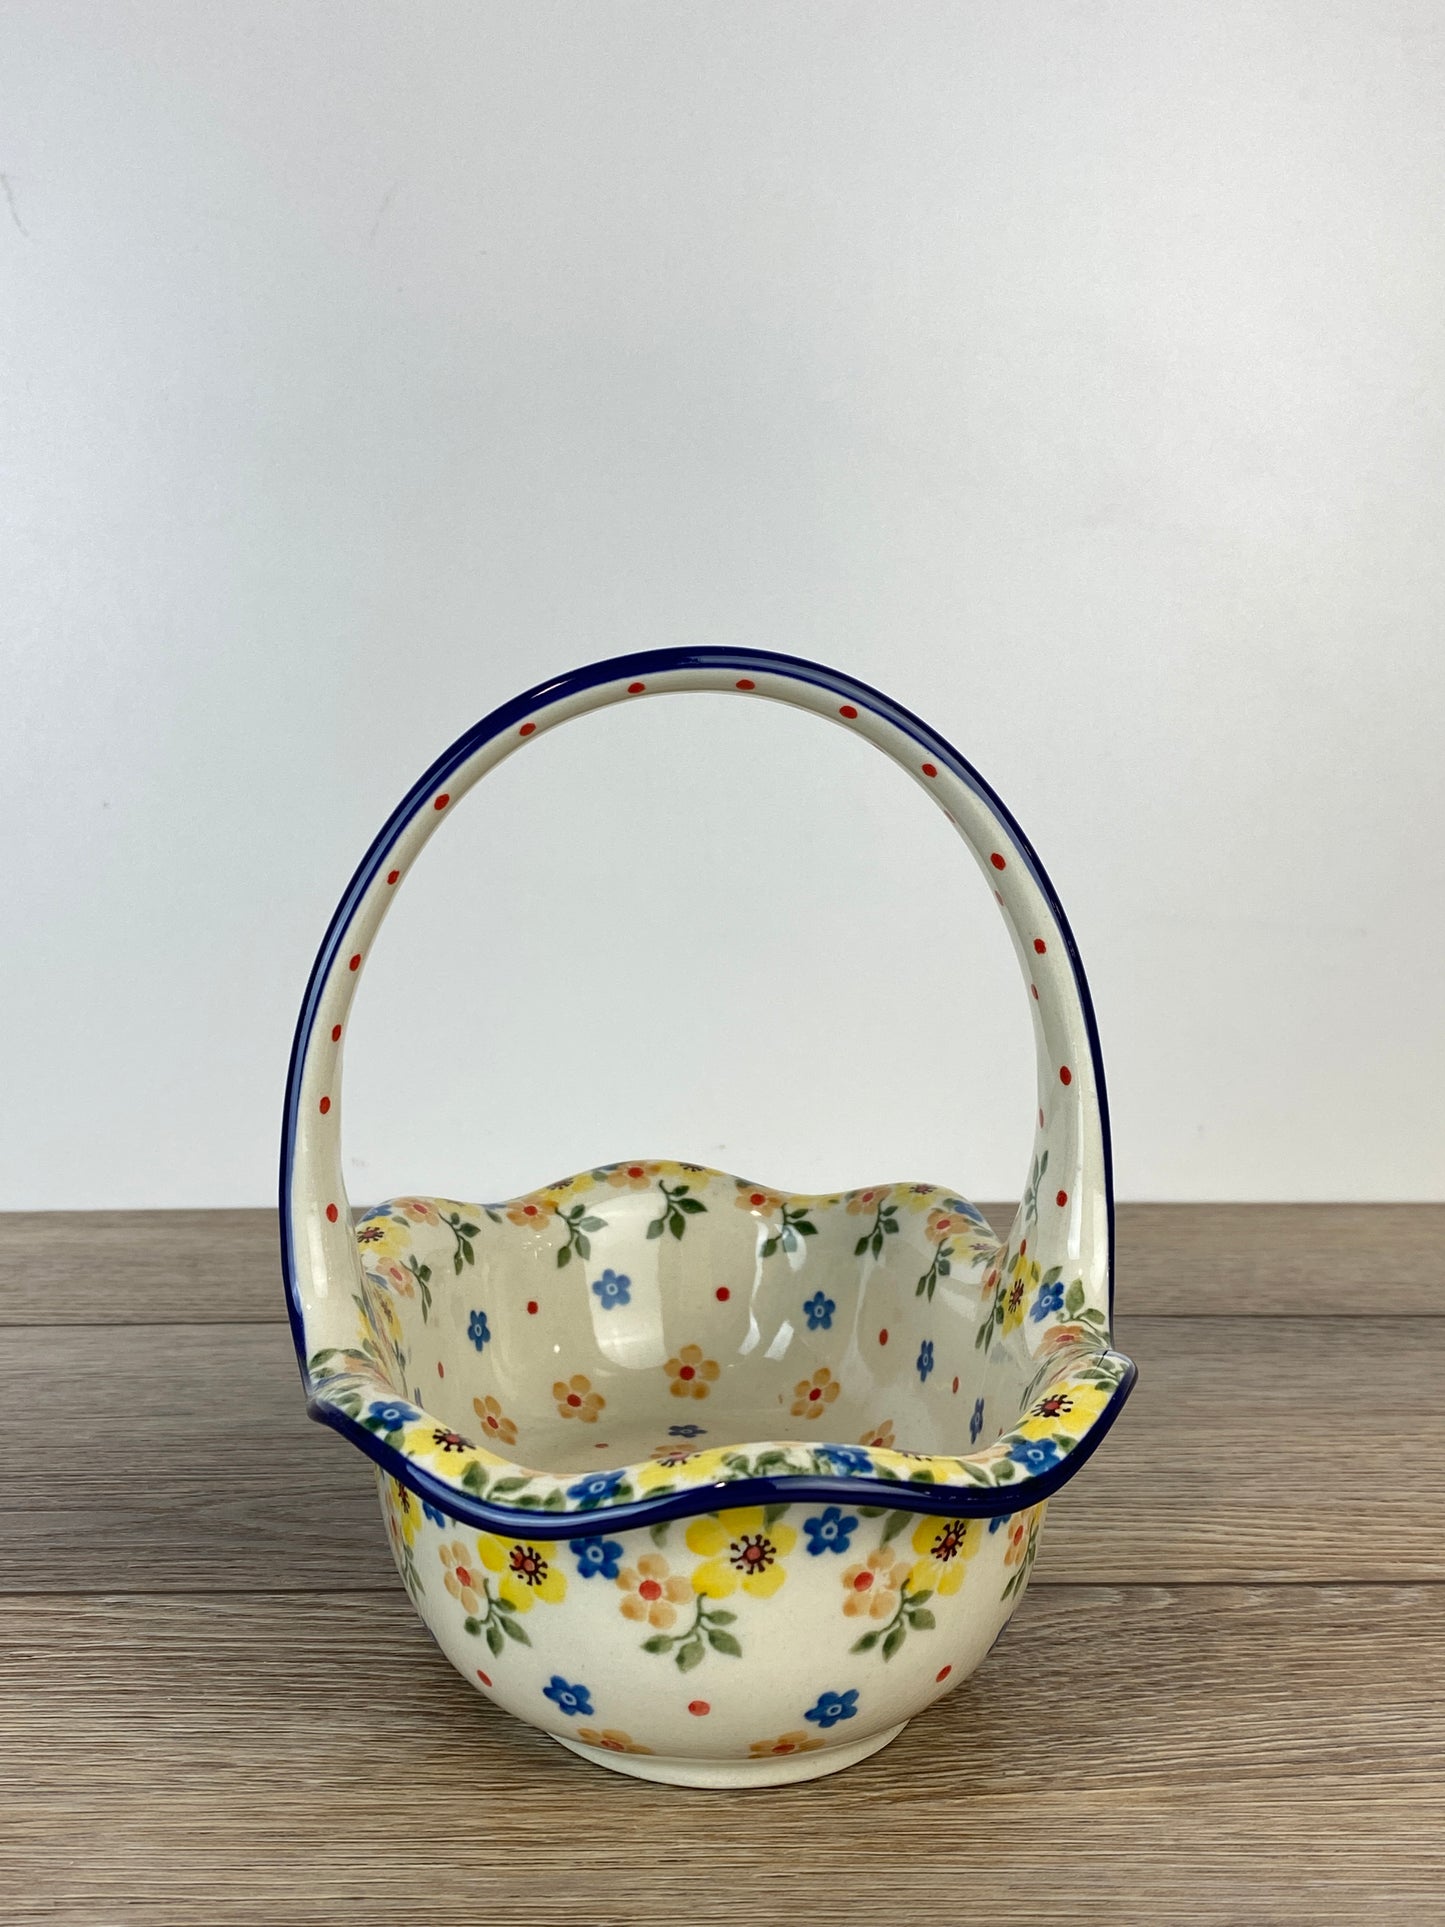 Basket with Handle - Shape A21 - Pattern 2225